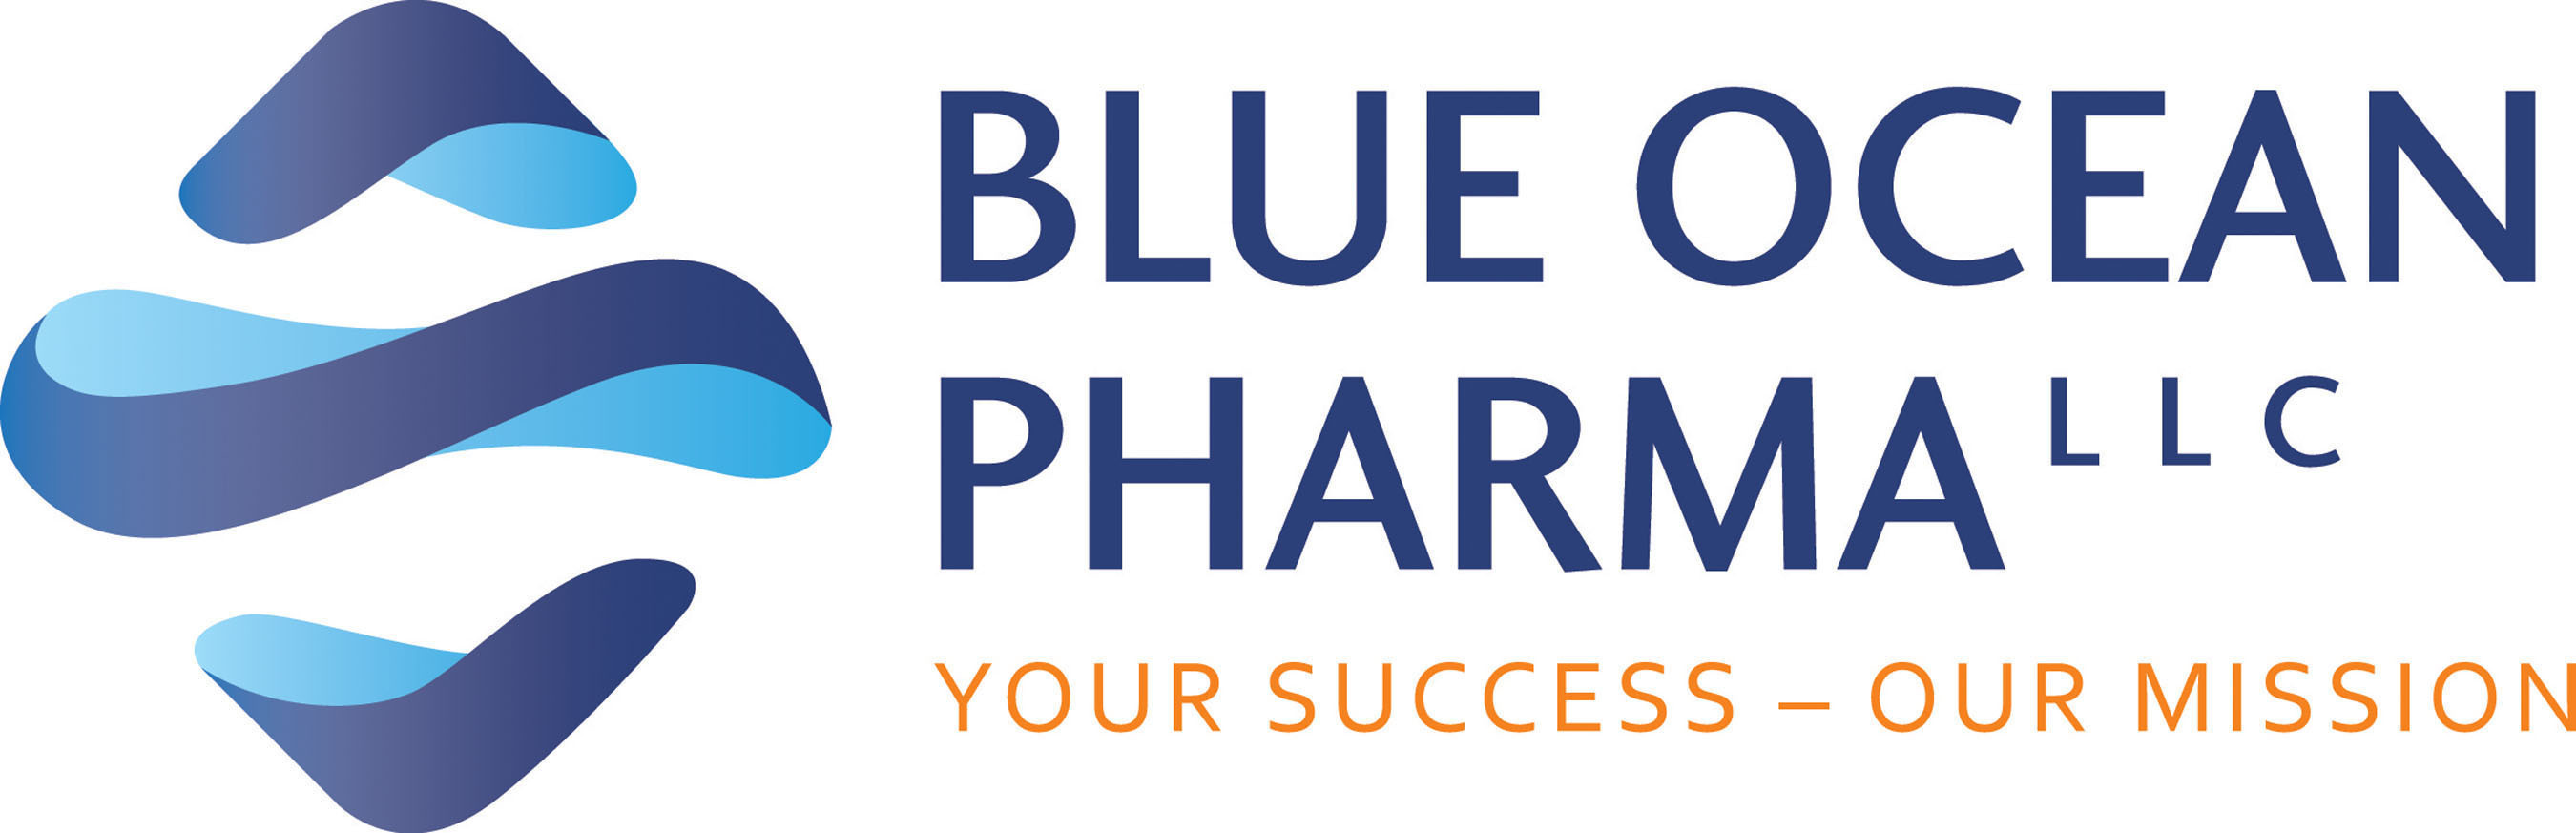 Blue Ocean Pharma Identifying Open Waters And Providing Creative Solutions In The Continuously Evolving Healthcare Market. (PRNewsFoto/Blue Ocean Pharma LLC) (PRNewsFoto/)